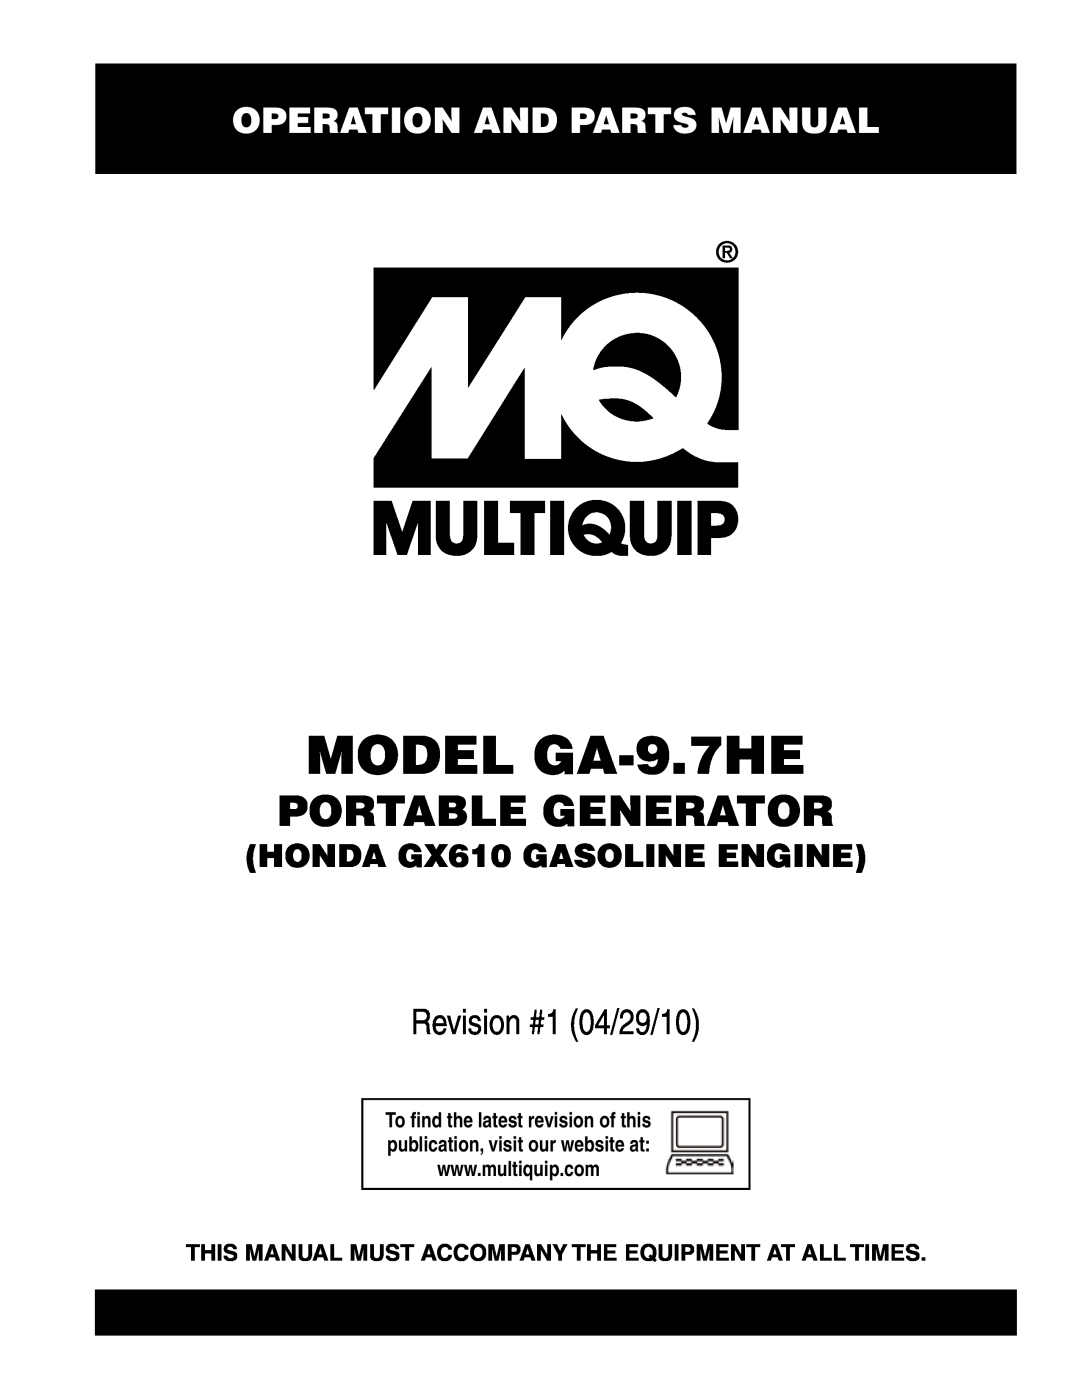 Multiquip ga-9.7HE manual Operation and Parts Manual, This Manual Must Accompany The Equipment At All Times 